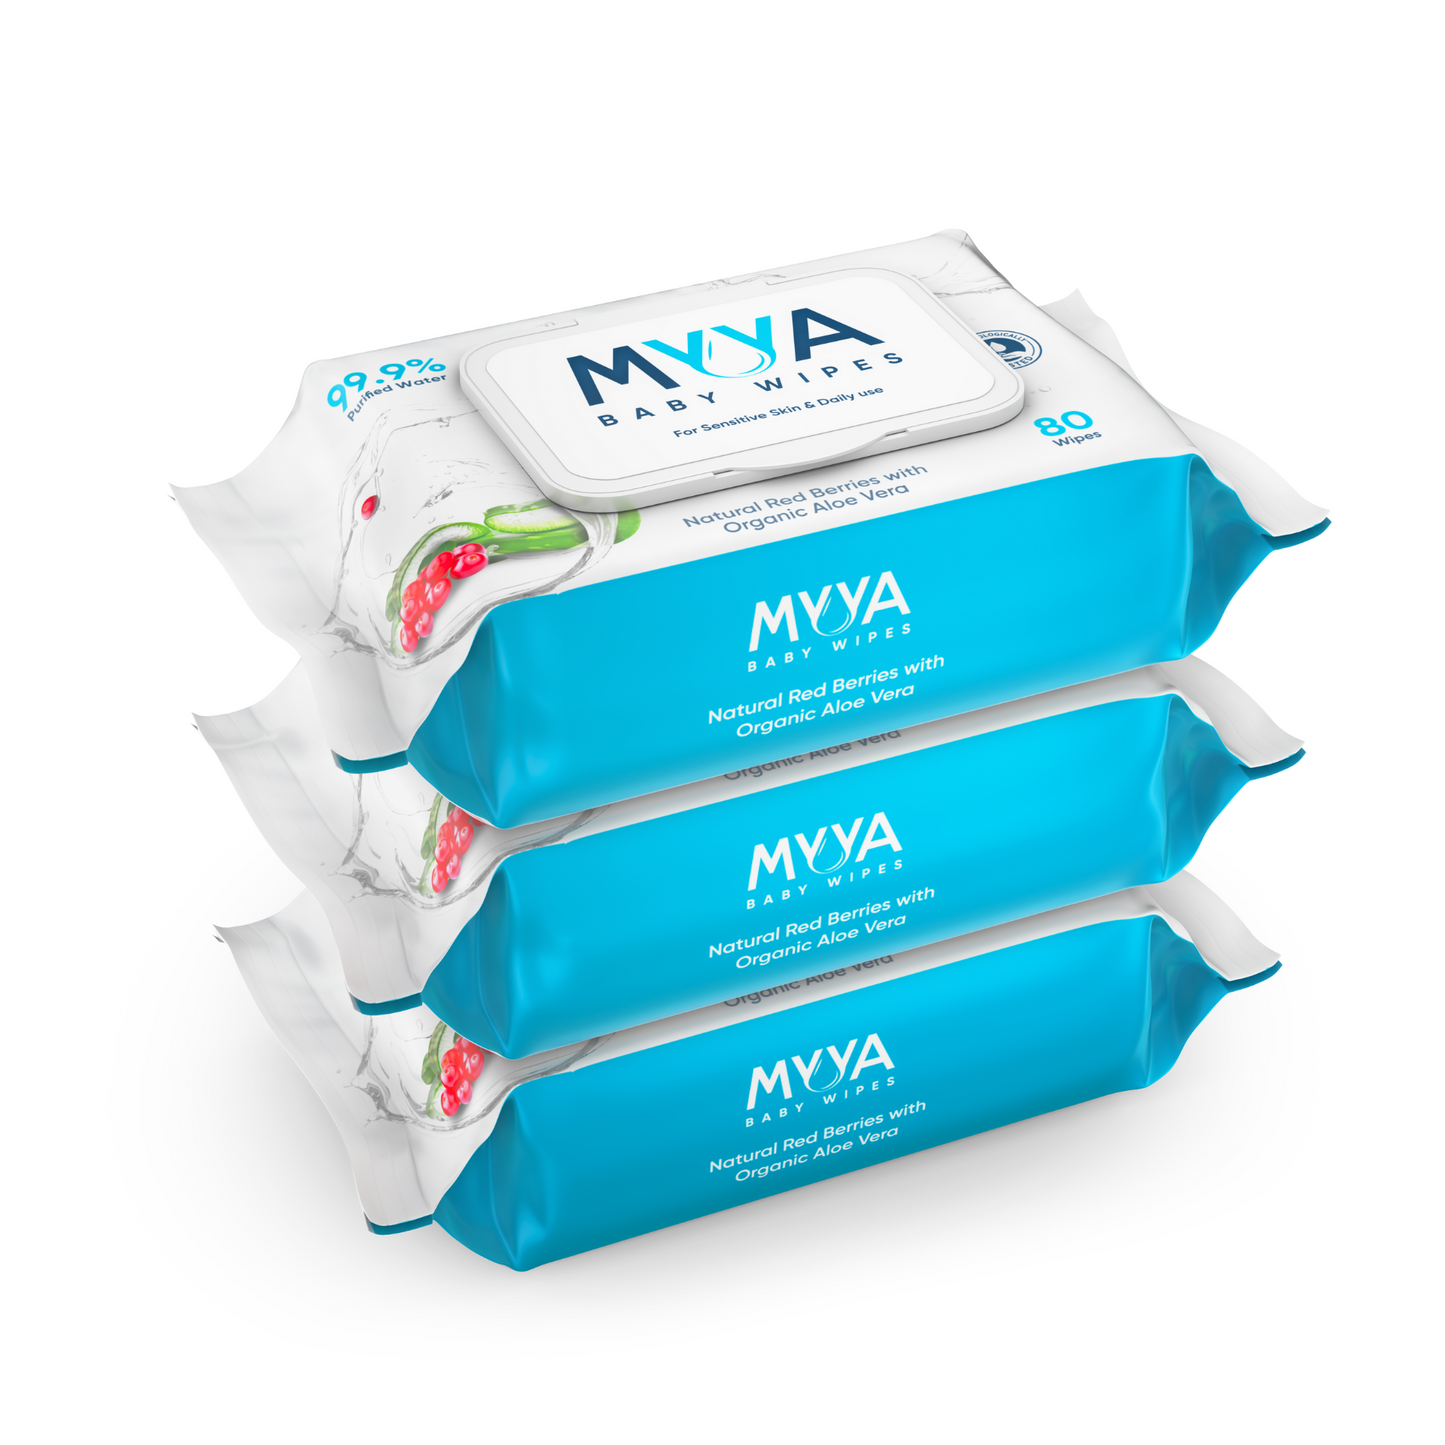 Myya Pure Baby Wipes made for Sensitive Skin - Pack of 3 x 80 Wipe count. Total 240 Wipes